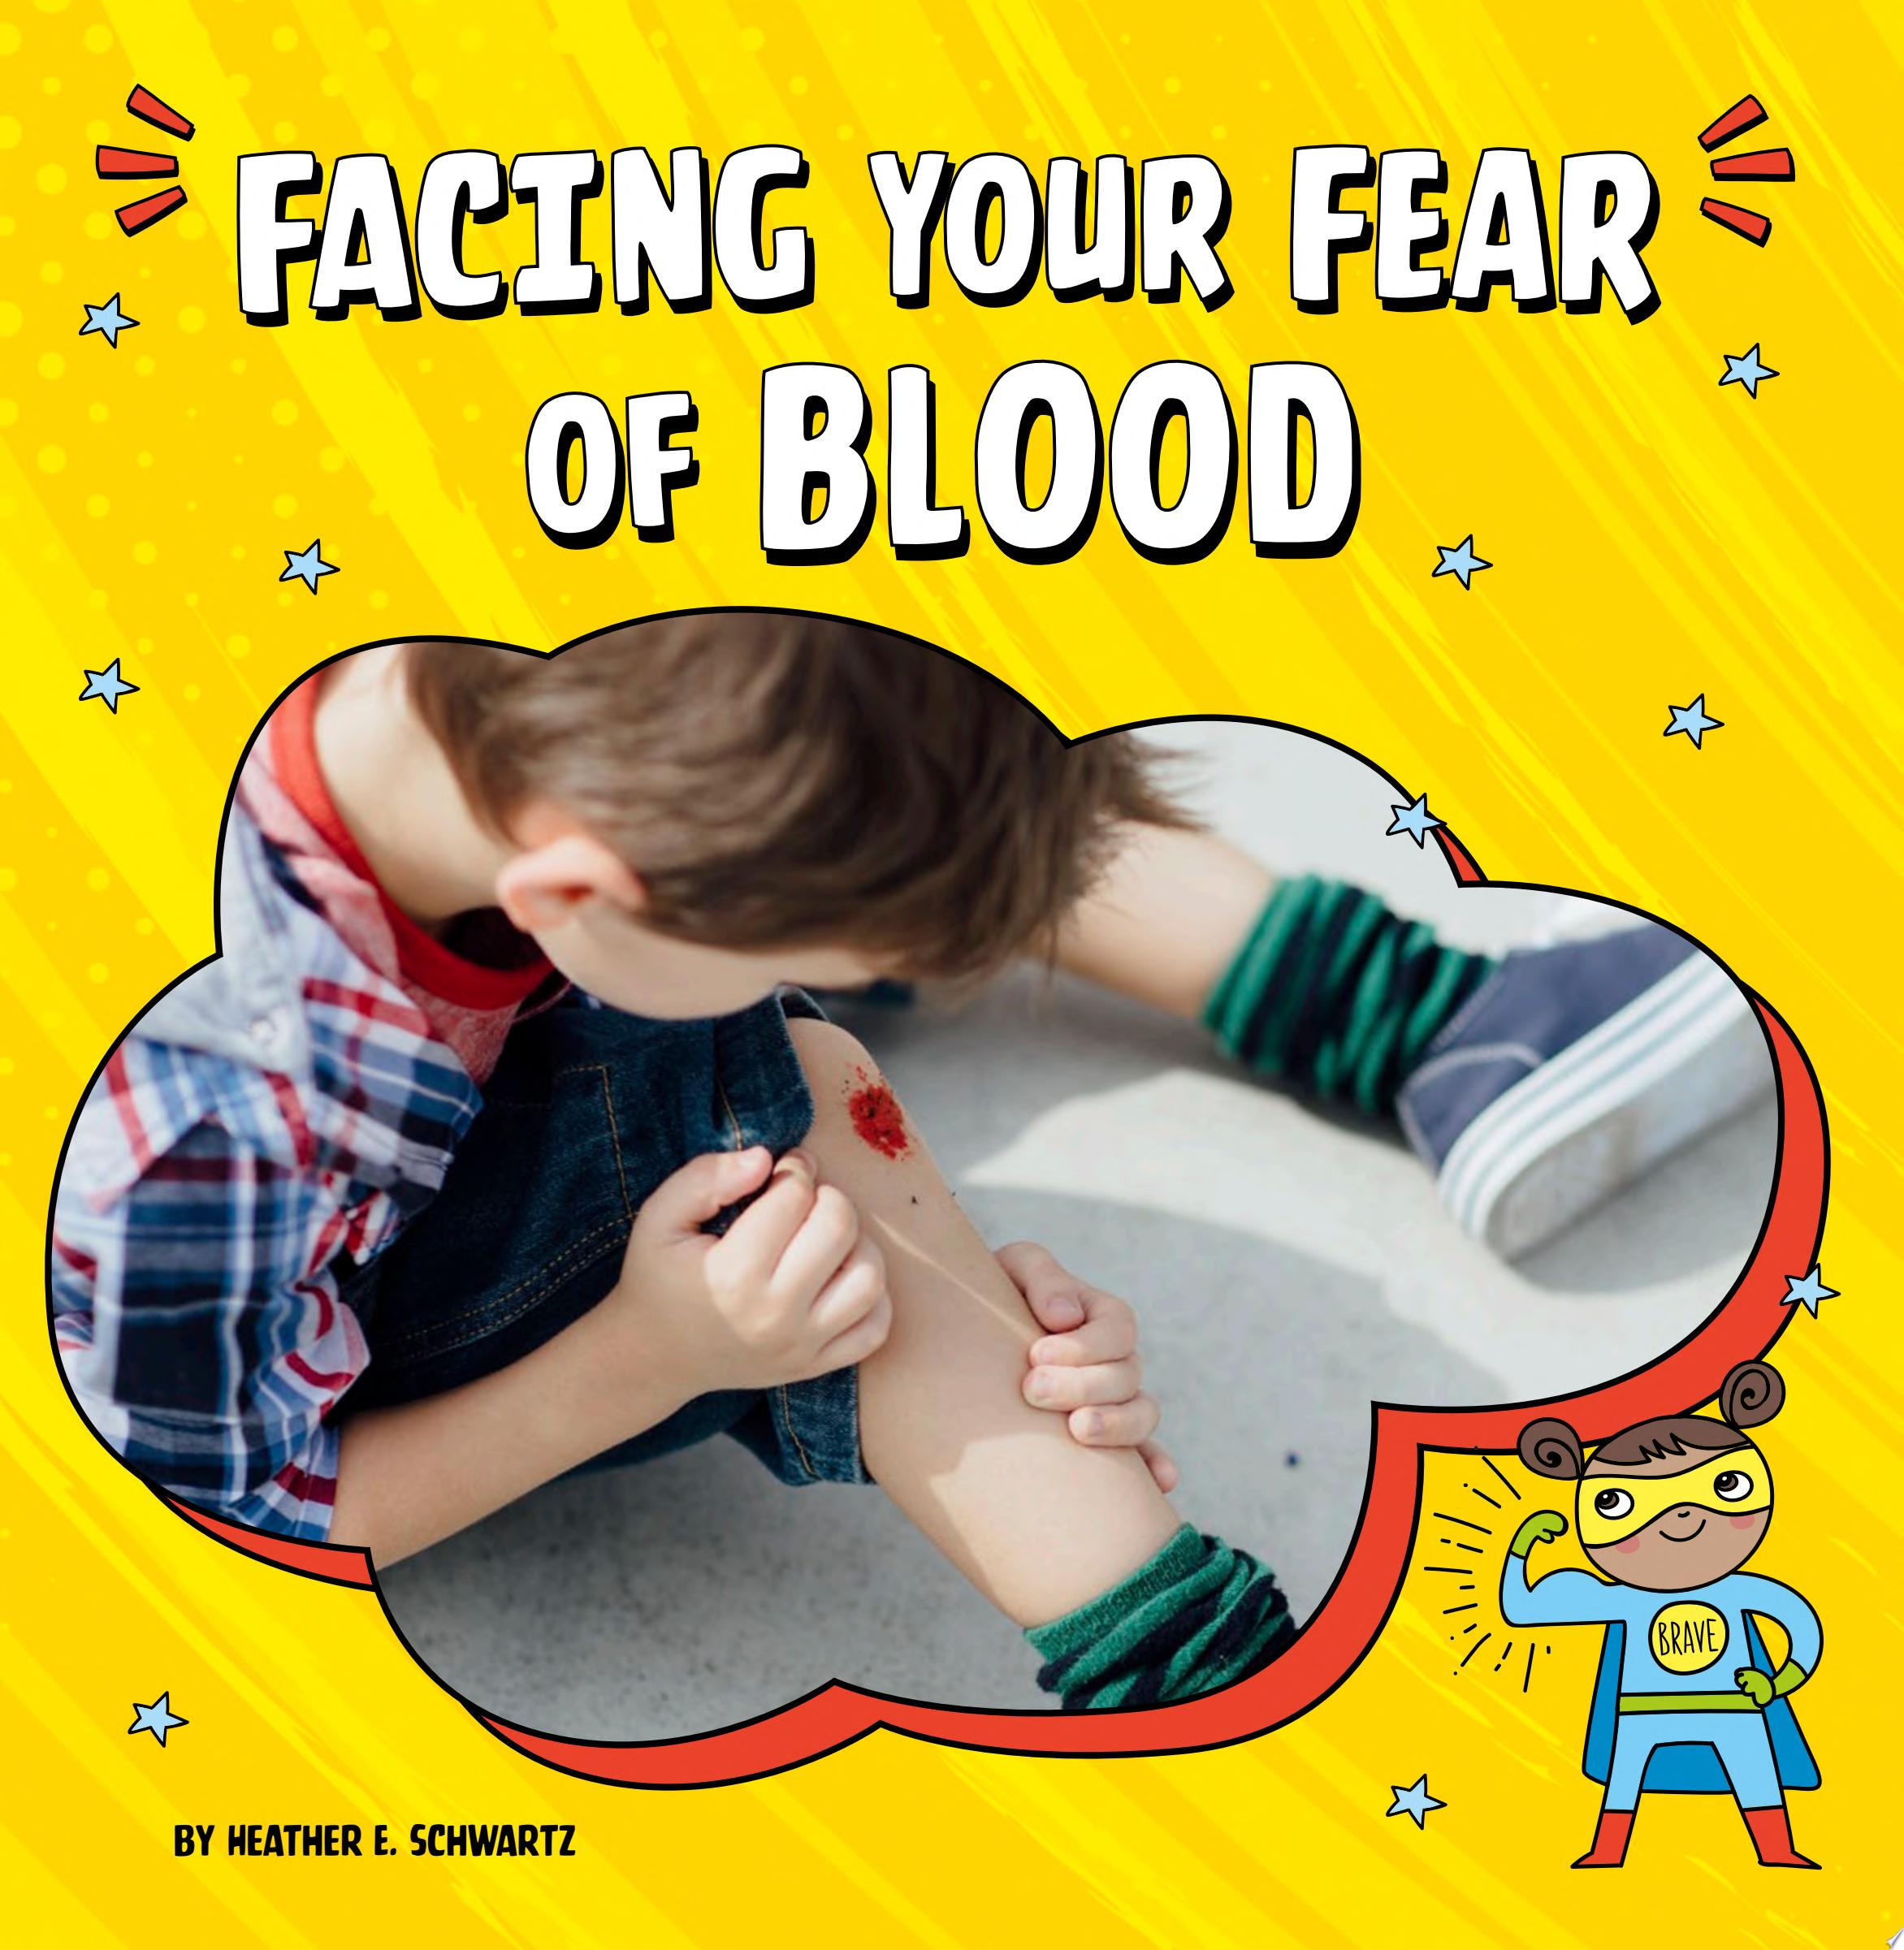 Image for "Facing Your Fear of Blood"